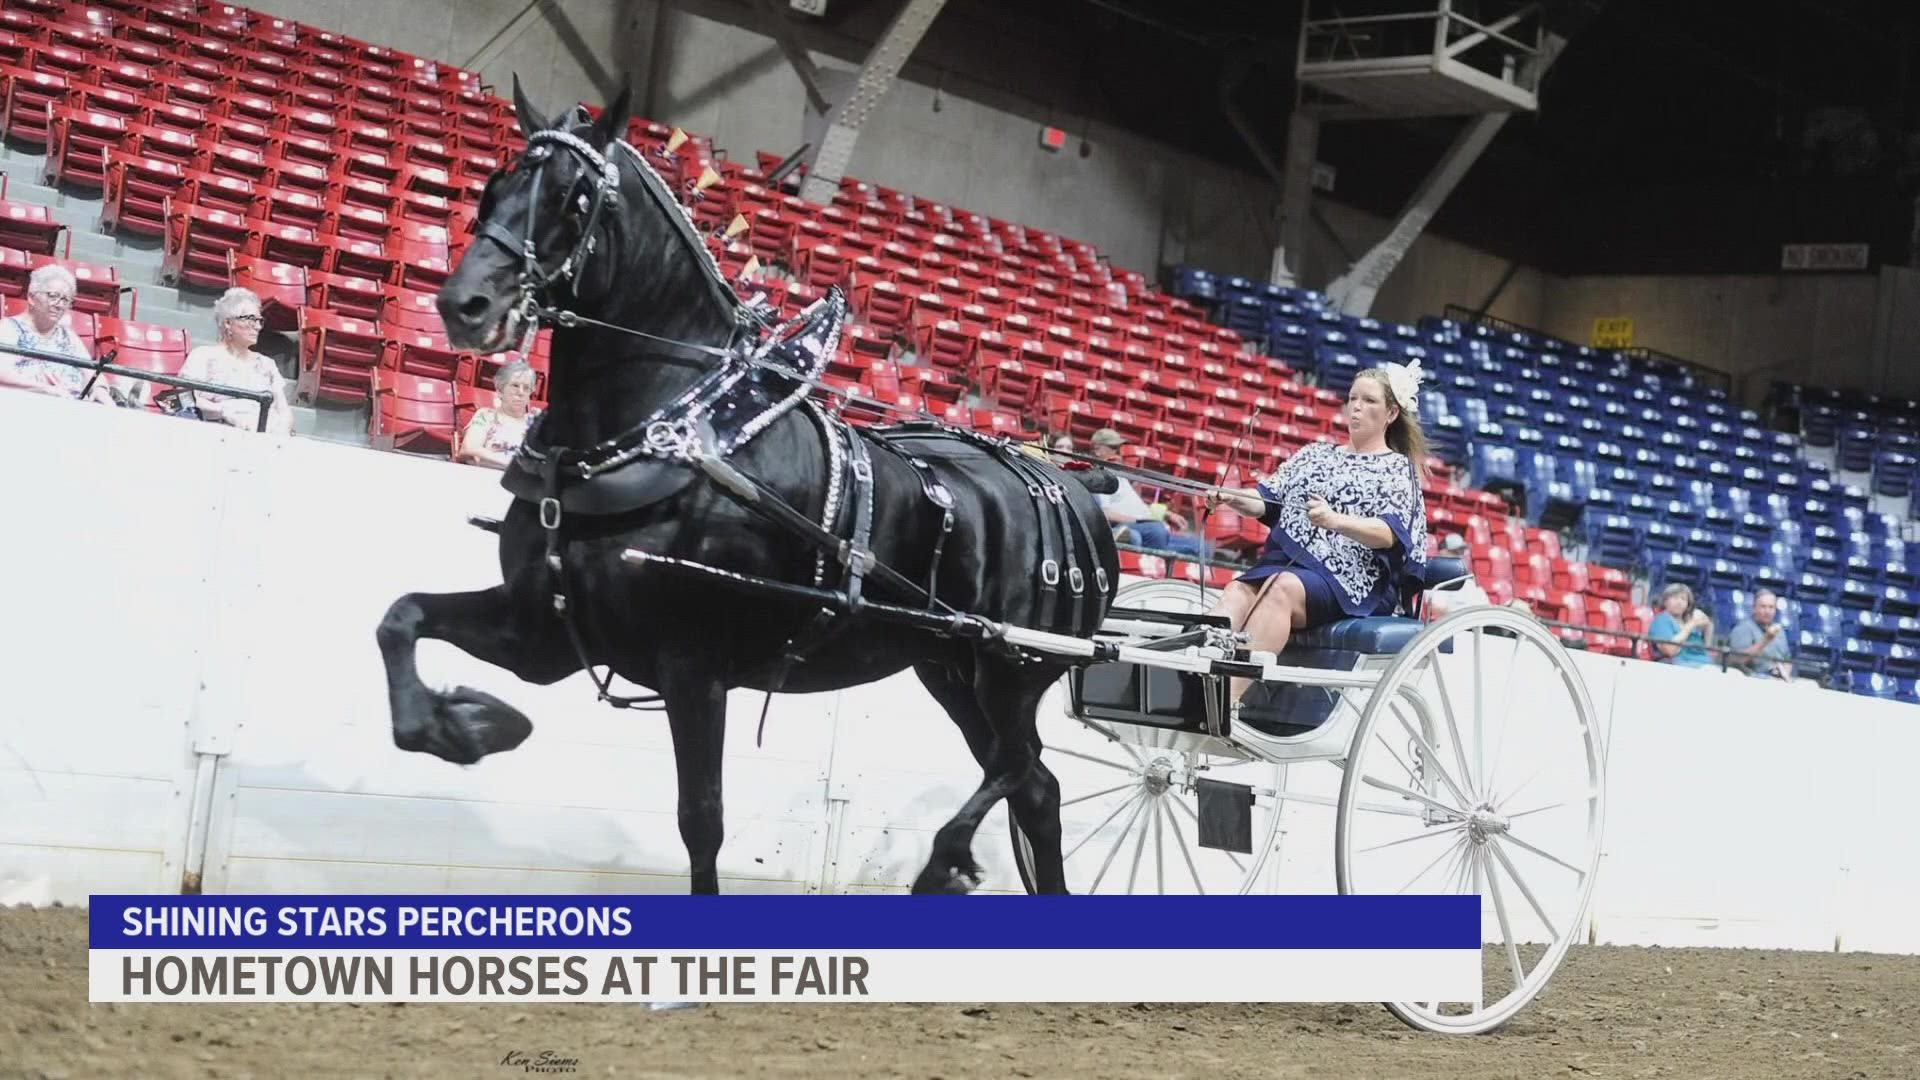 Shining Stars Percherons shows have won both world and national titles before, and now the team will join in on the fun at the Iowa State Fair.